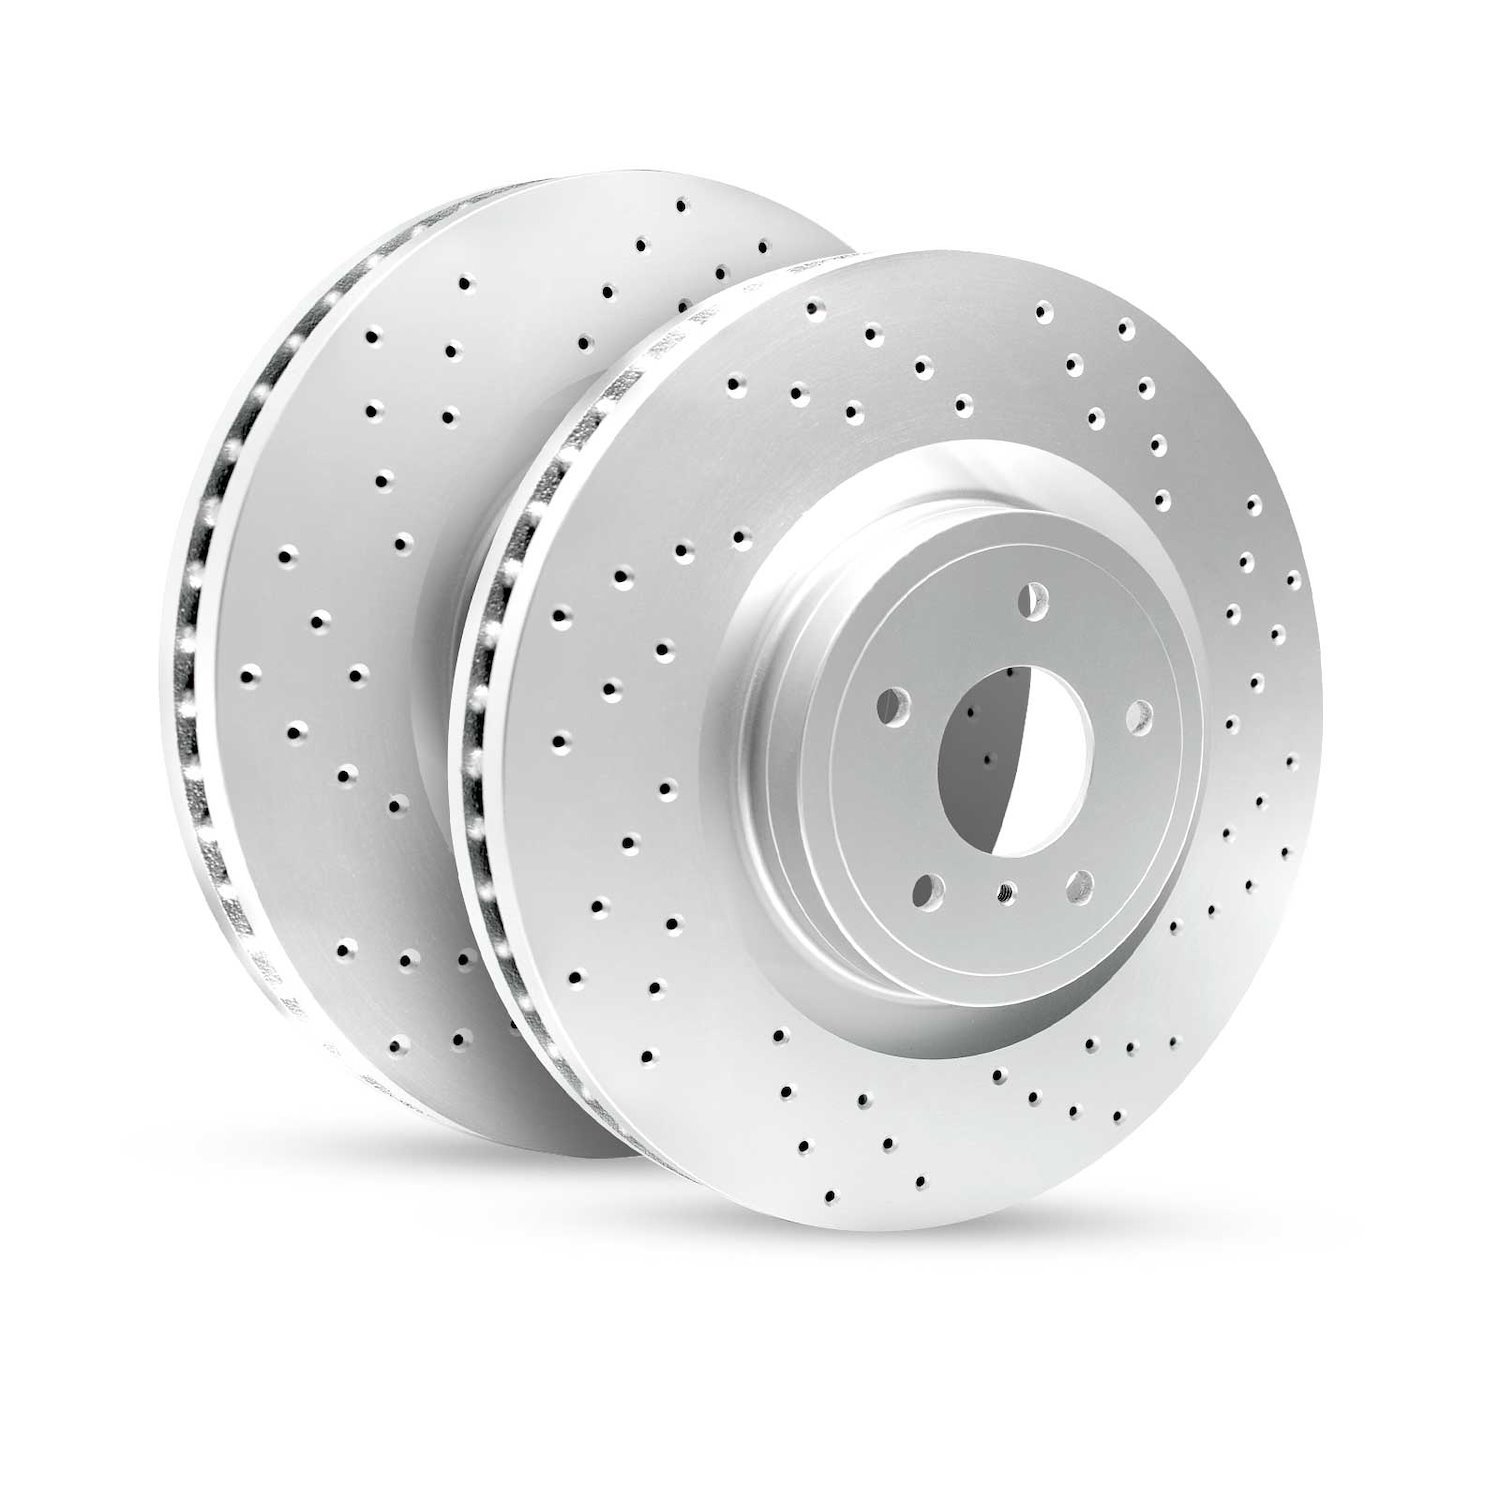 GEO-Carbon Drilled/Slotted Rotors, 2003-2008 Infiniti/Nissan,